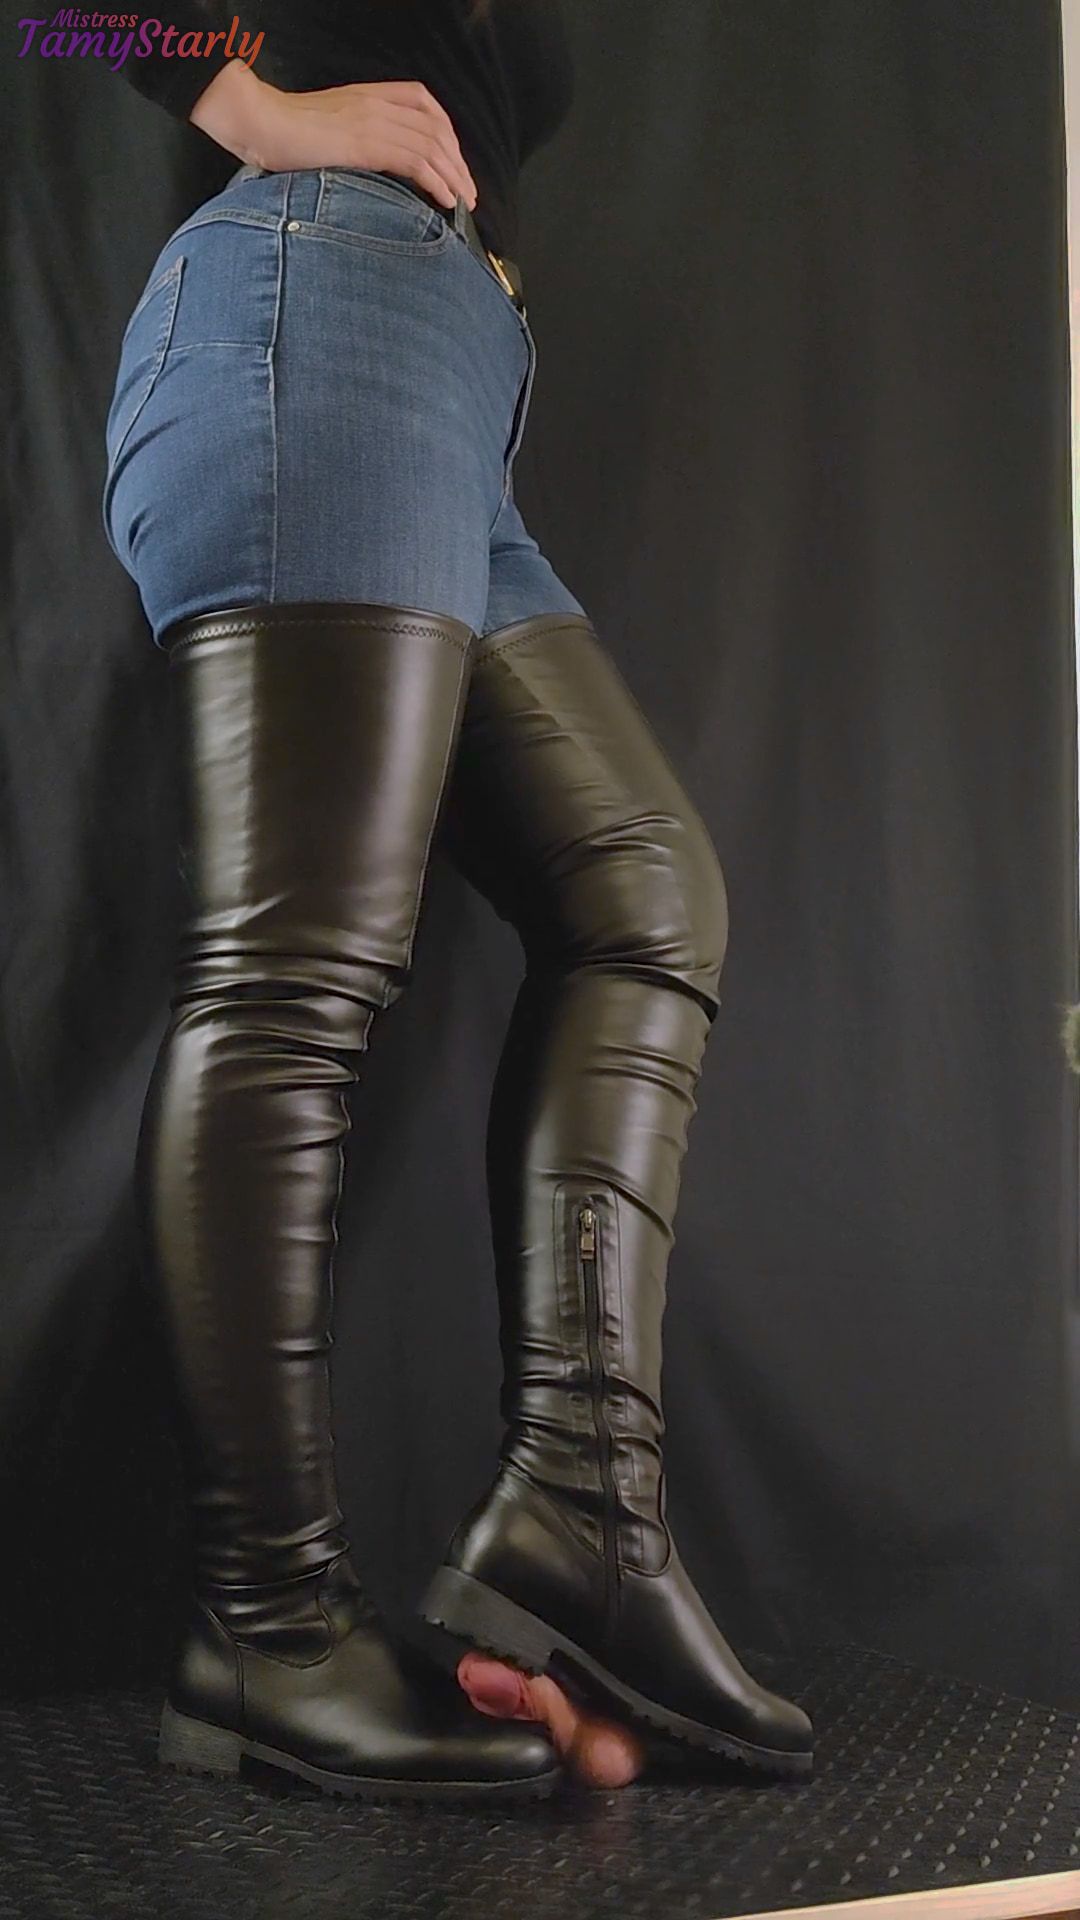 March & Blast in Super Thigh Boots - Ball Stomp, Bootjob #18